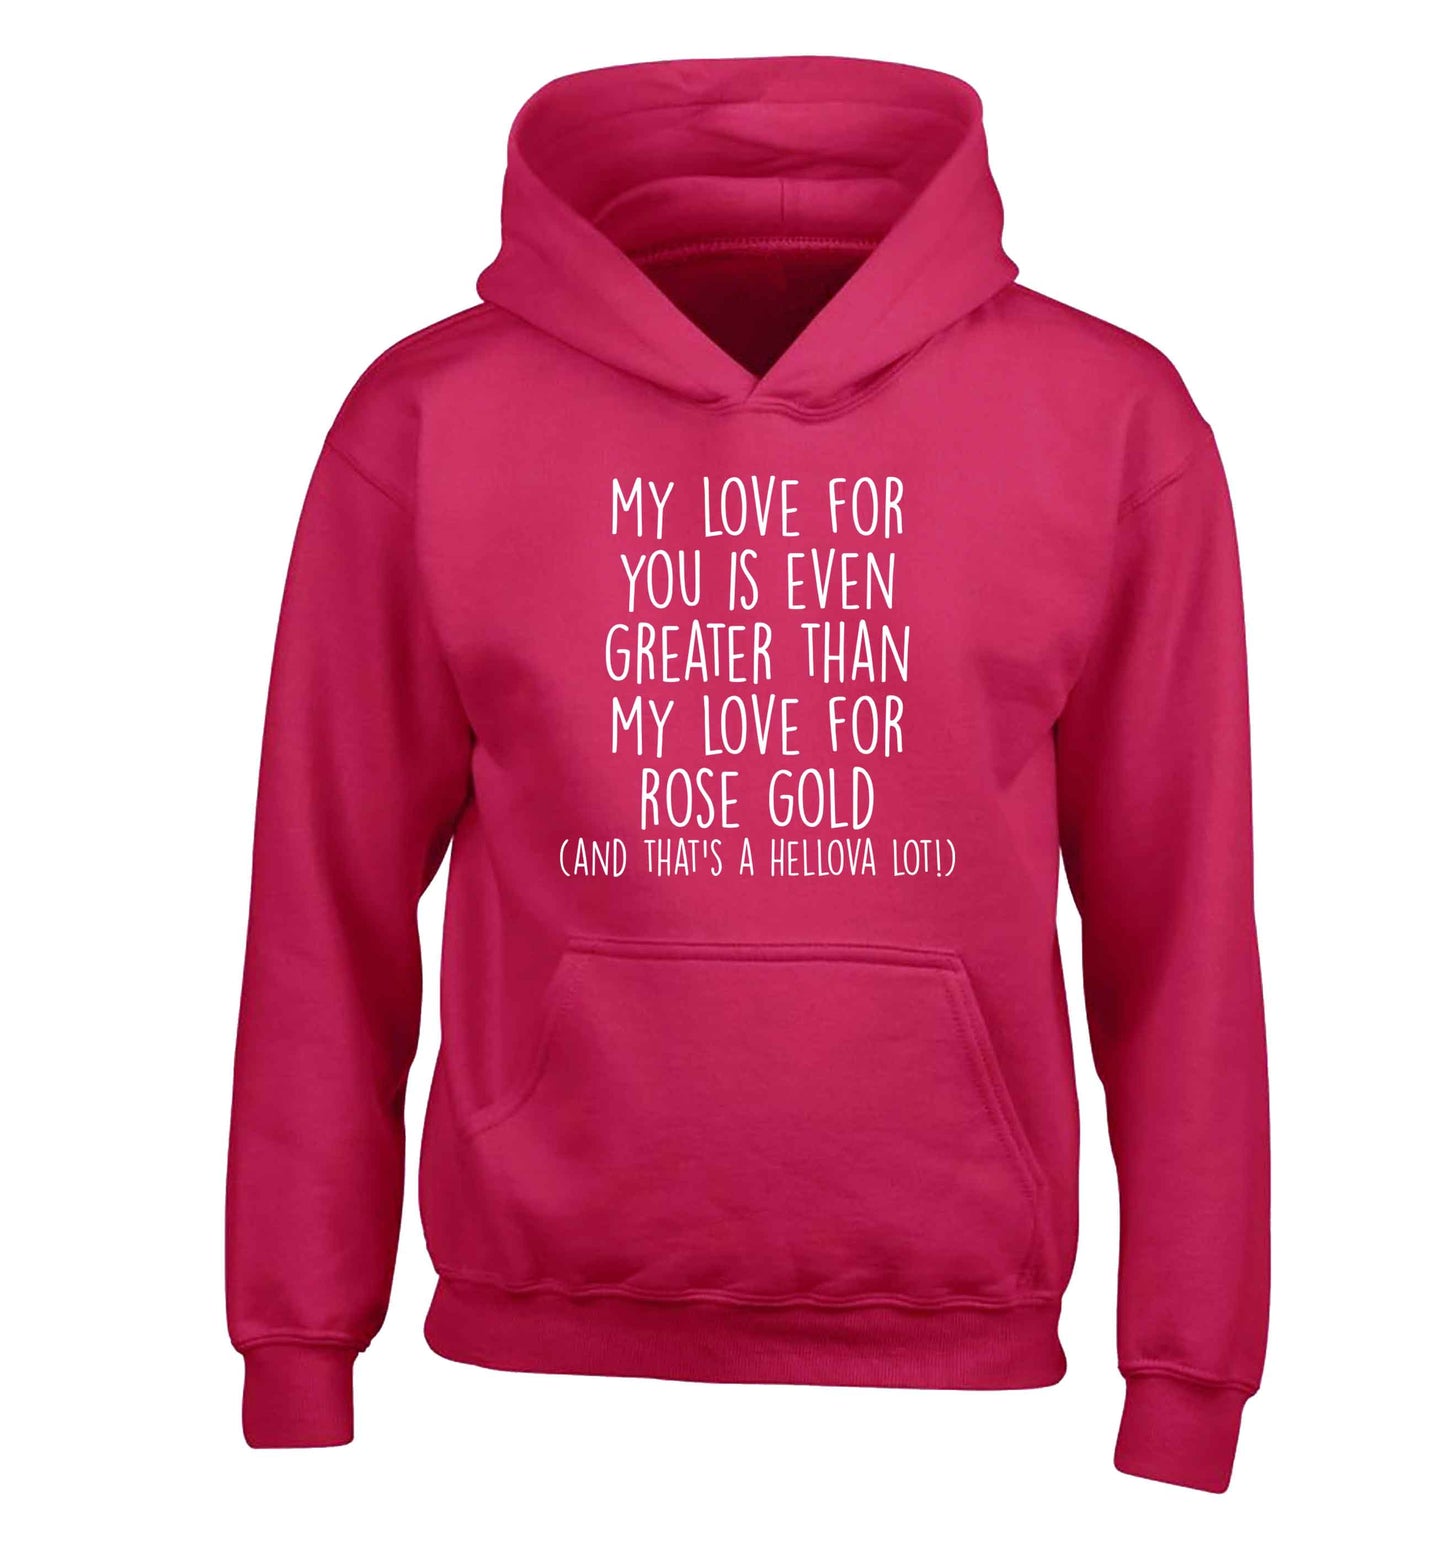 My love for you is even greater than my love for rose gold (and that's a hellova lot) children's pink hoodie 12-13 Years